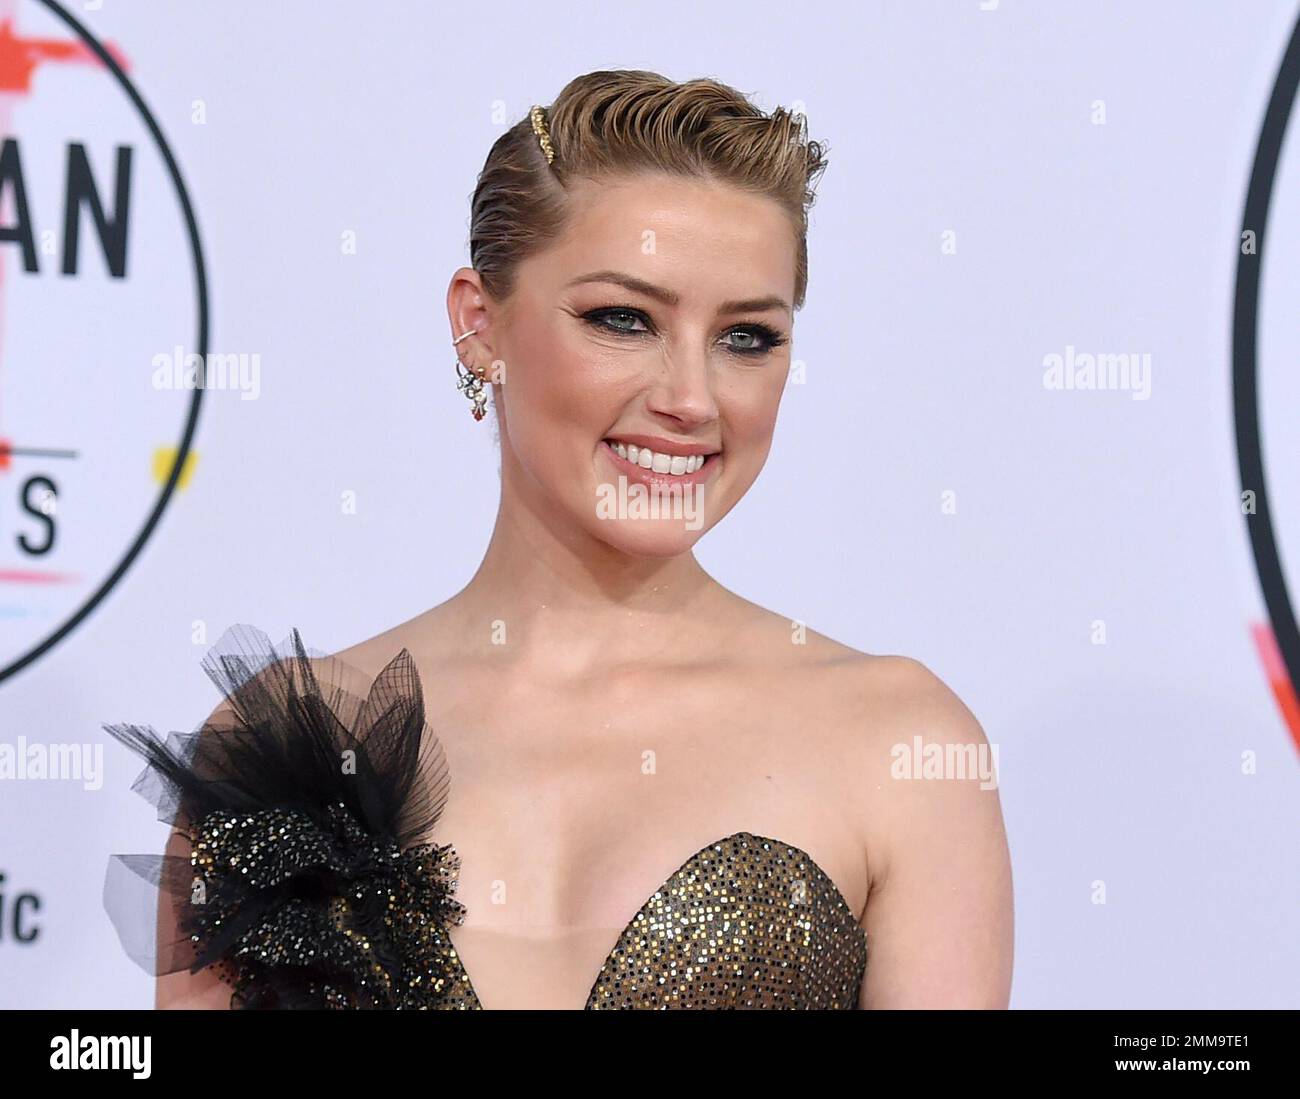 FILE - In this Oct. 9, 2018 file photo, actress Amber Heard arrives at the  American Music Awards in Los Angeles. Heard plays the femme fatale Nicola  Six in the film "London